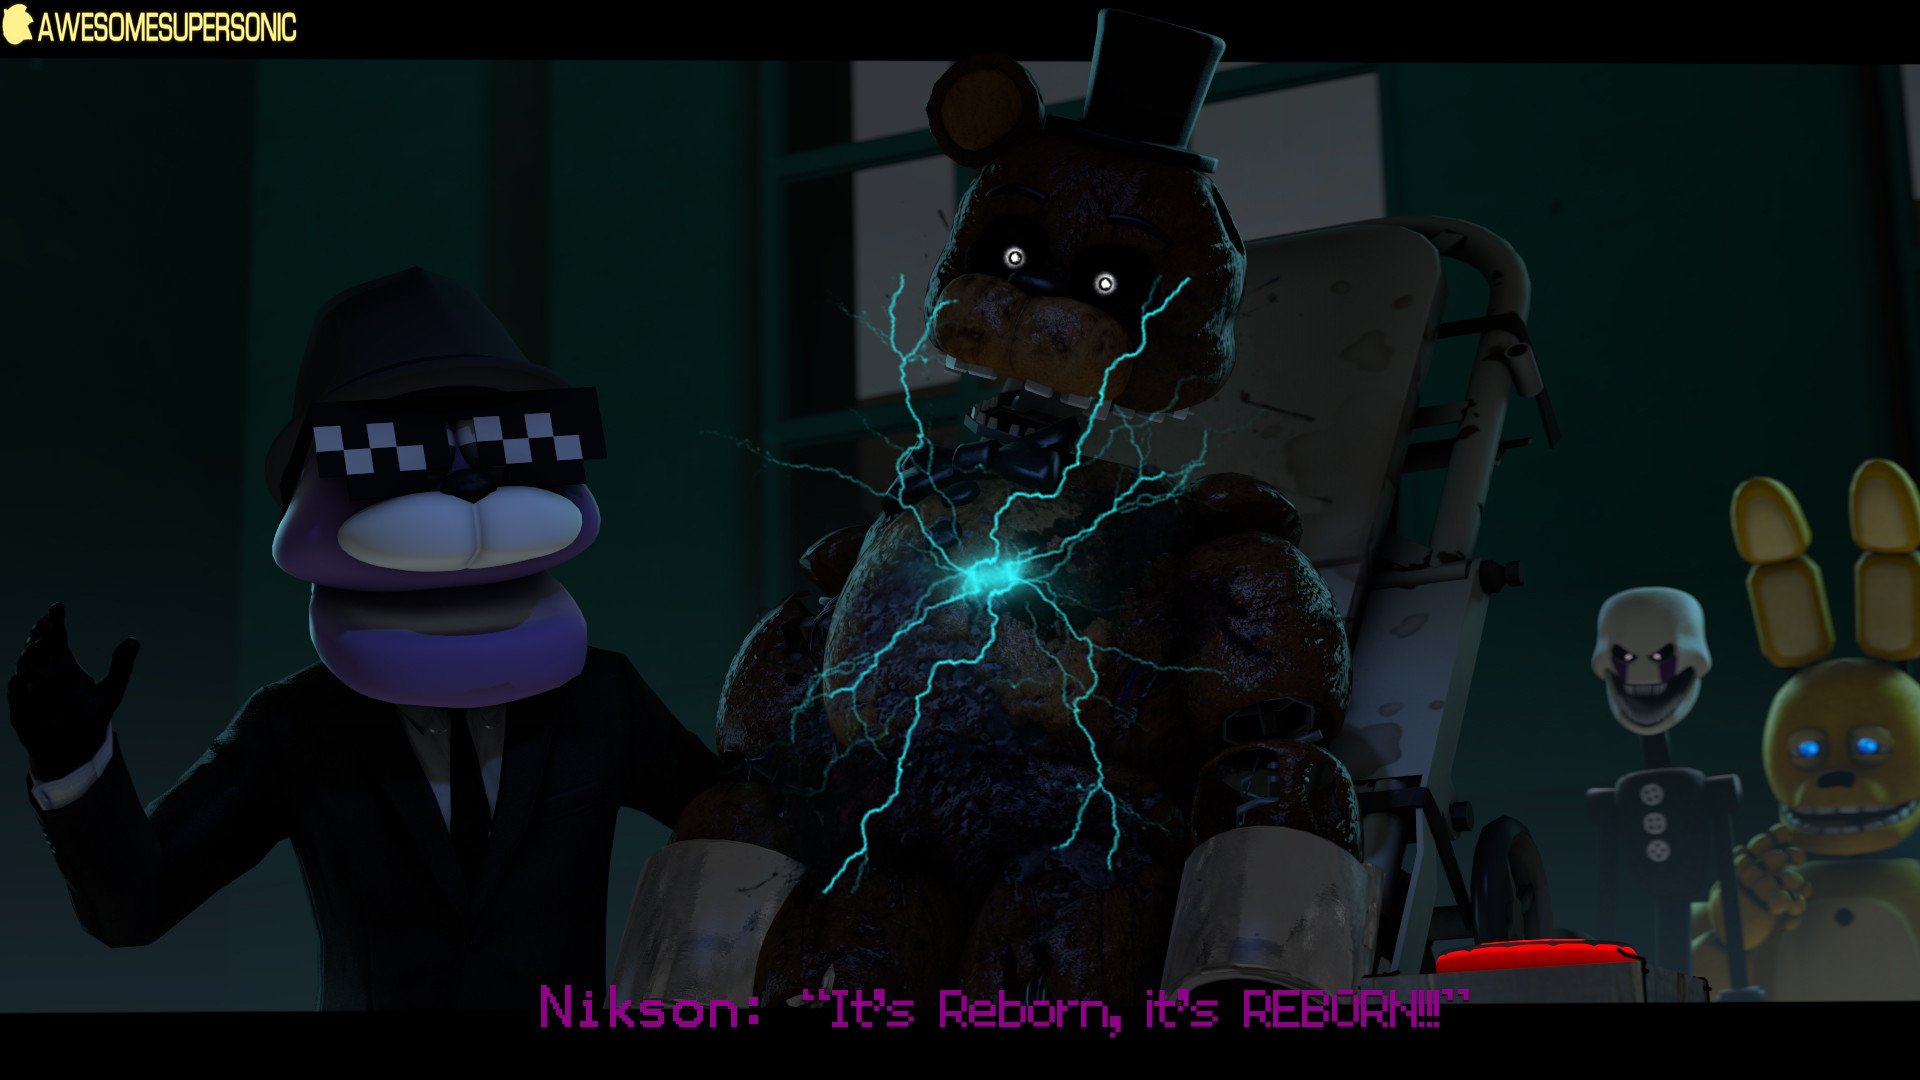 1920x1080 [SFM FNaF] It is reborn by AwesomeSuperSonic on DeviantArt